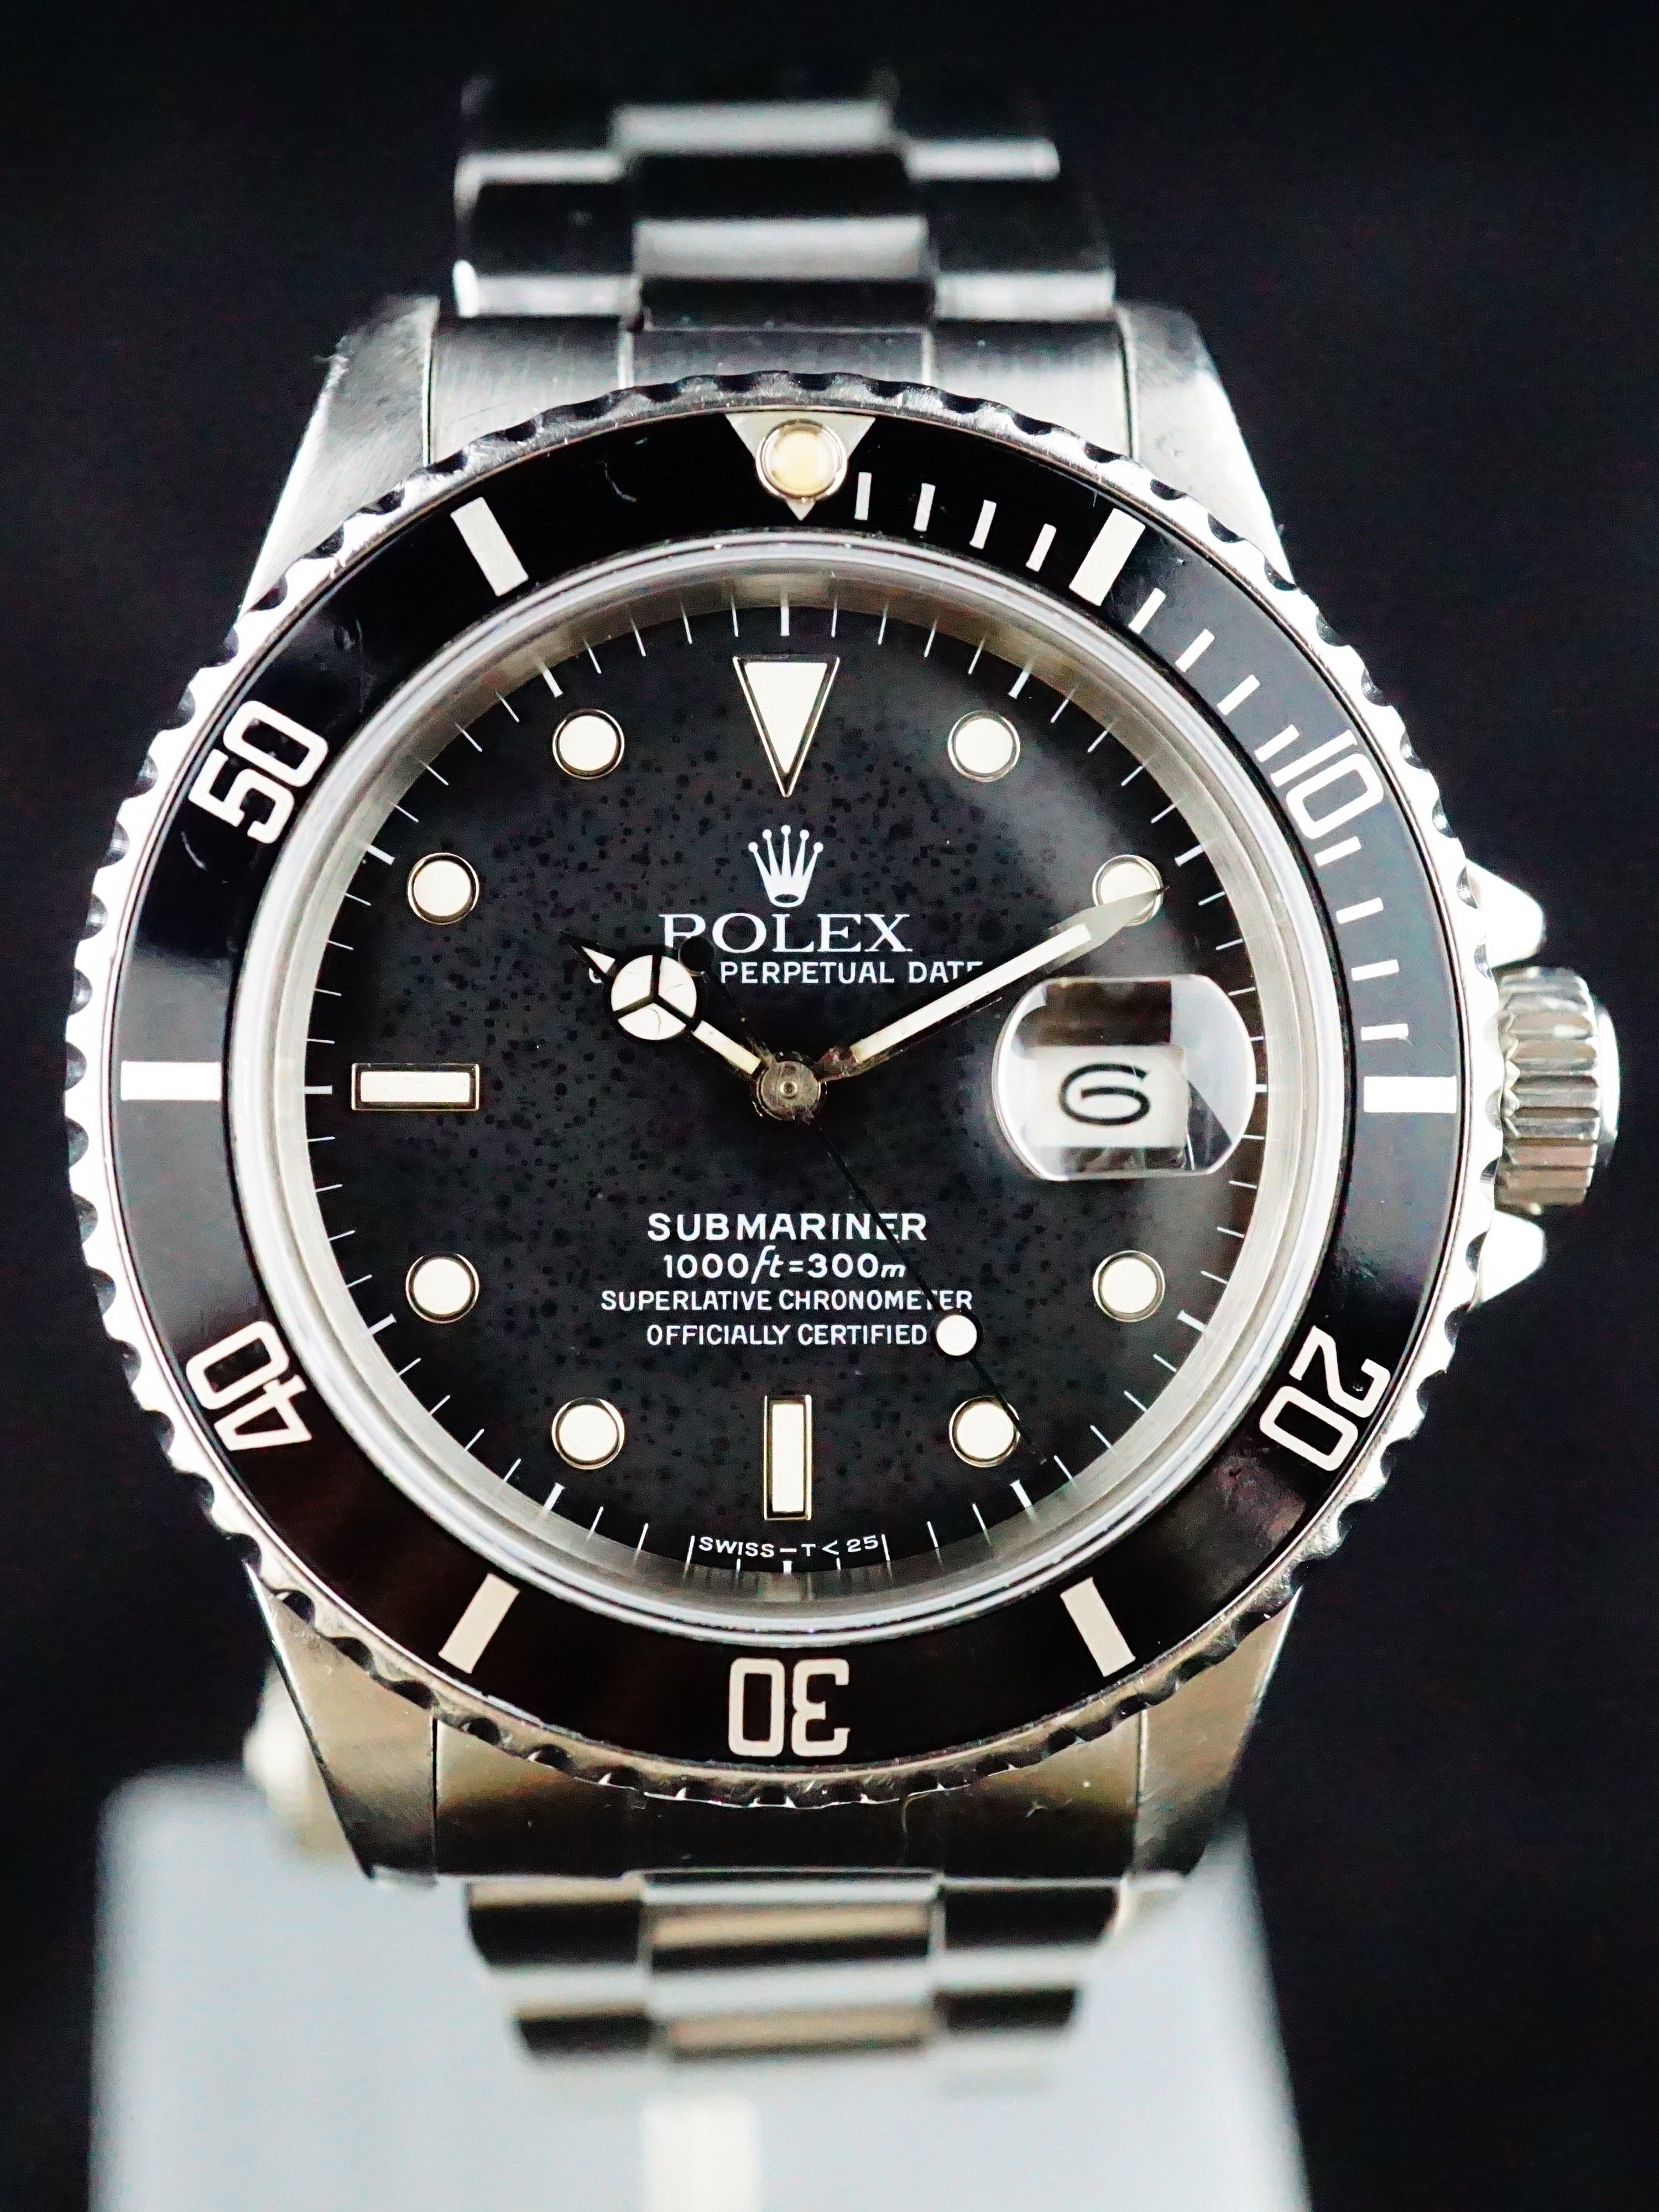 1988 rolex for sale